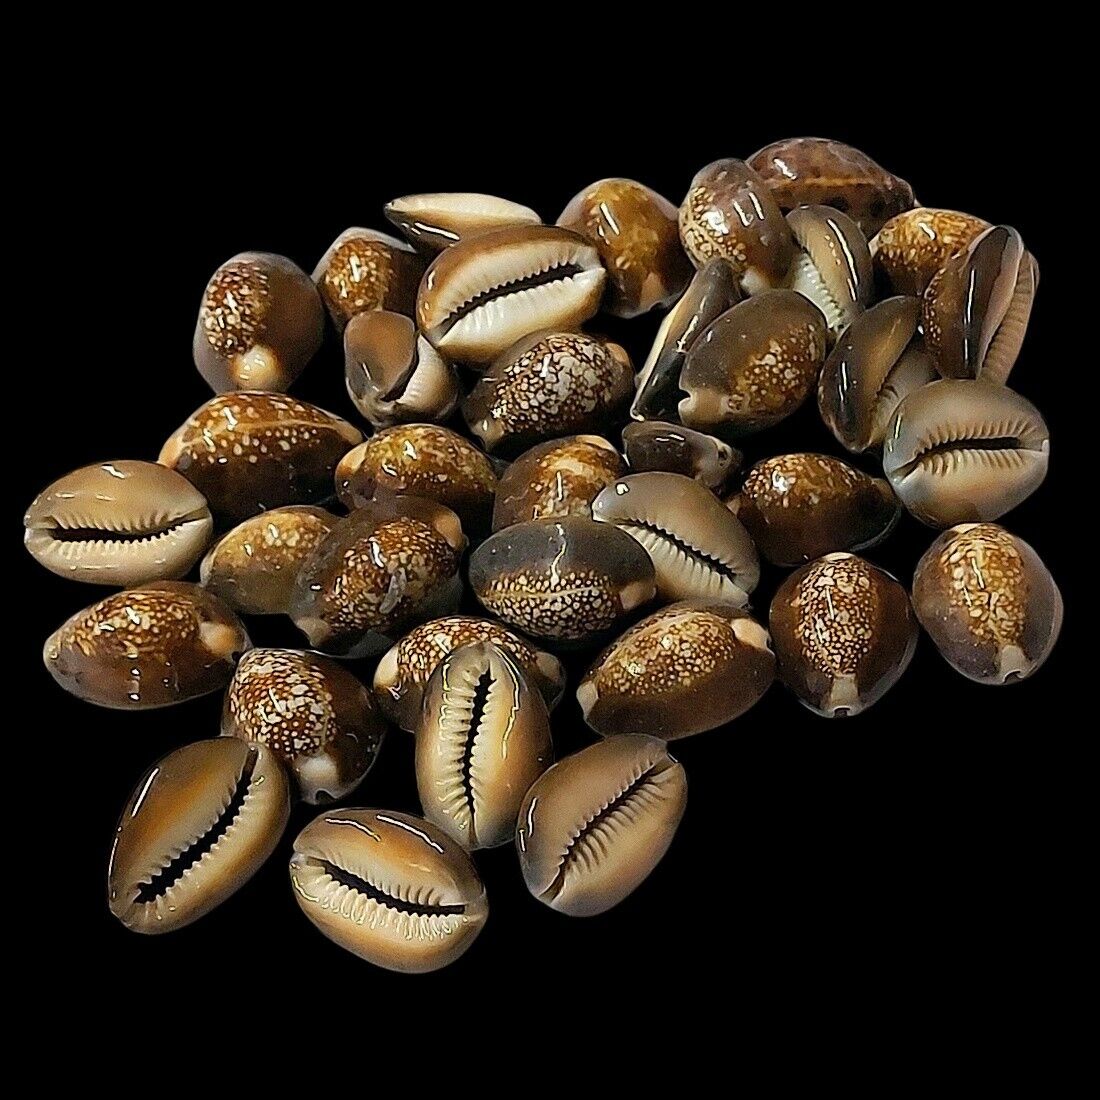 Brown Cowrie Shells For Crafts Art Decor Natural Sea Shell 20 pcs